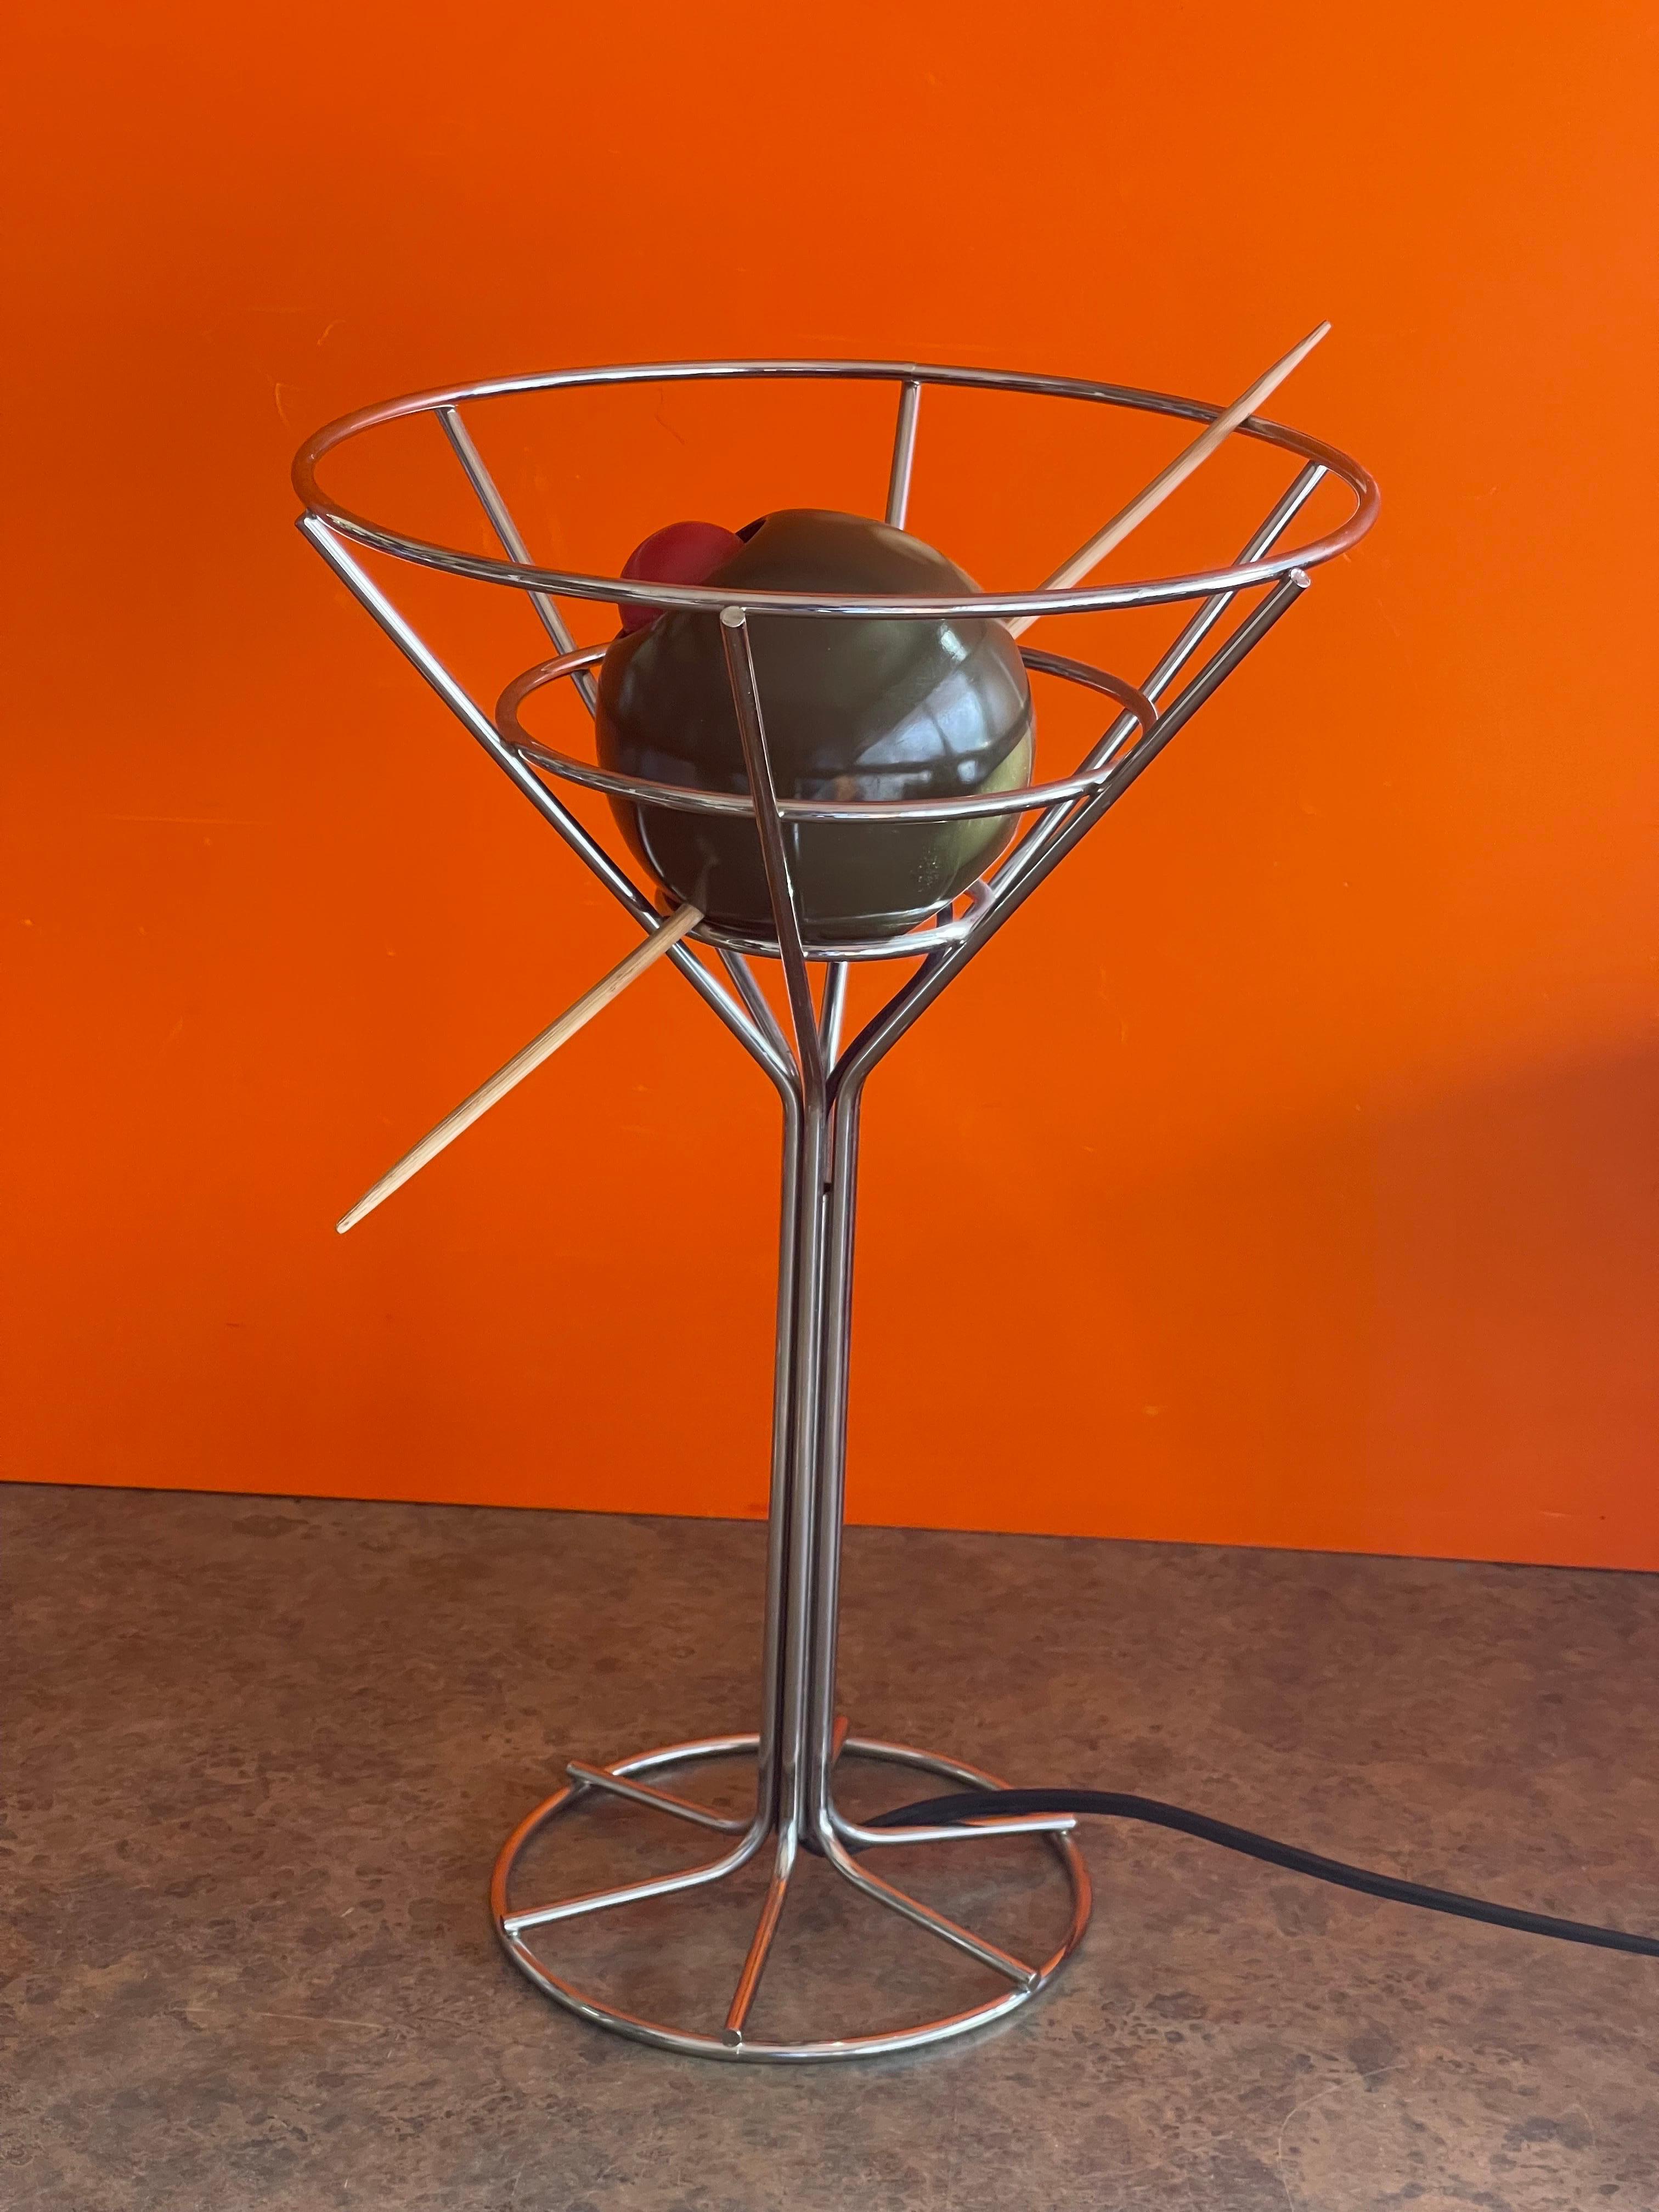 martini lamp with olive